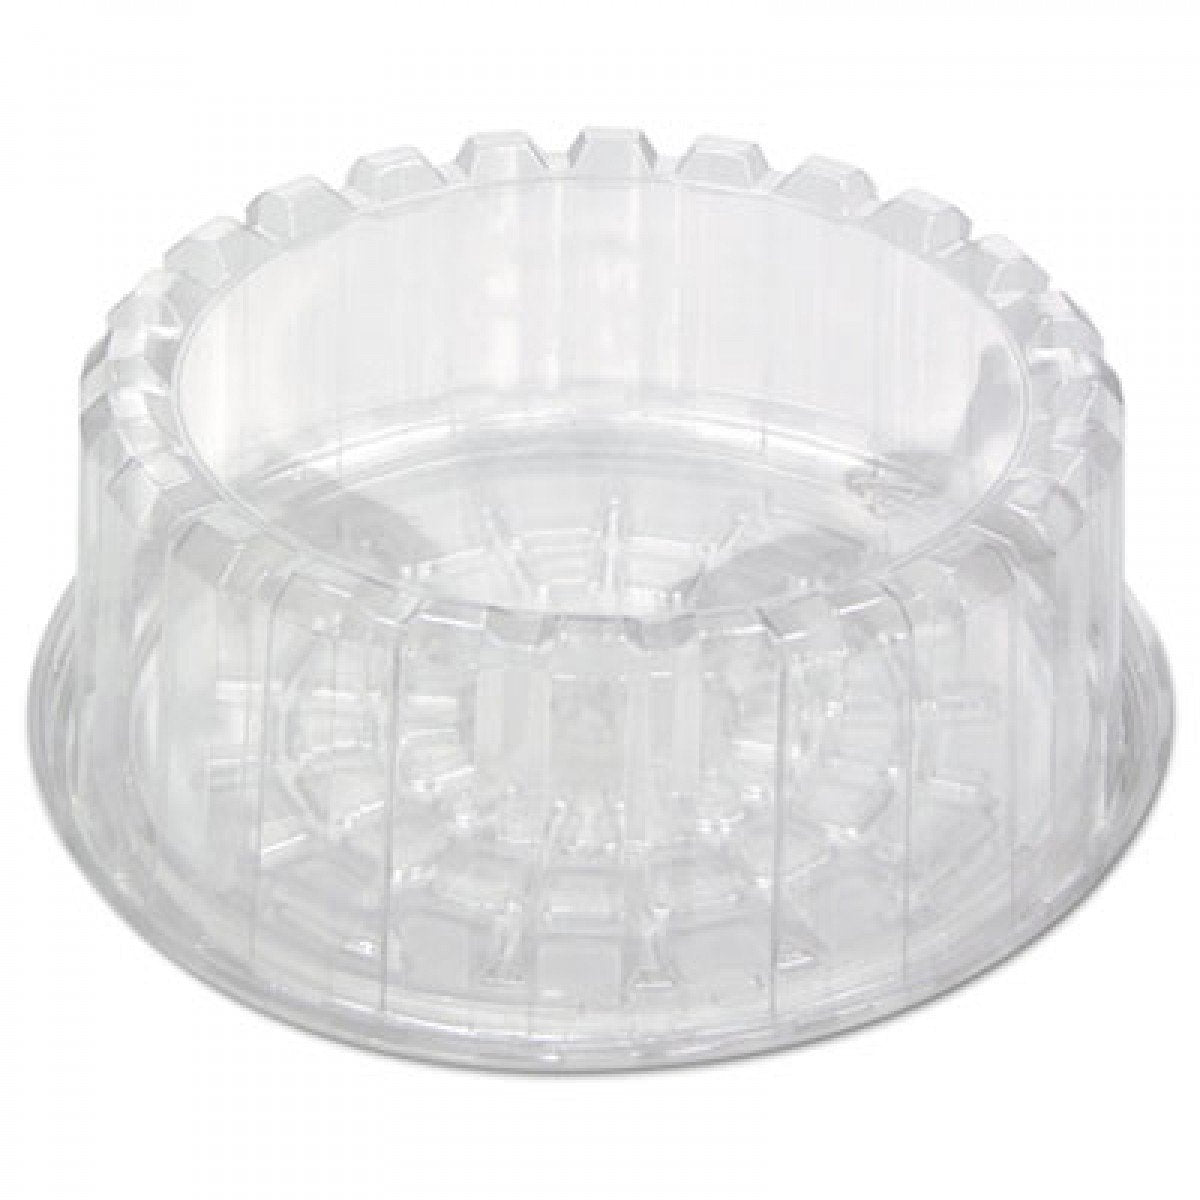 7" Cake Dome Containers - Gafbros